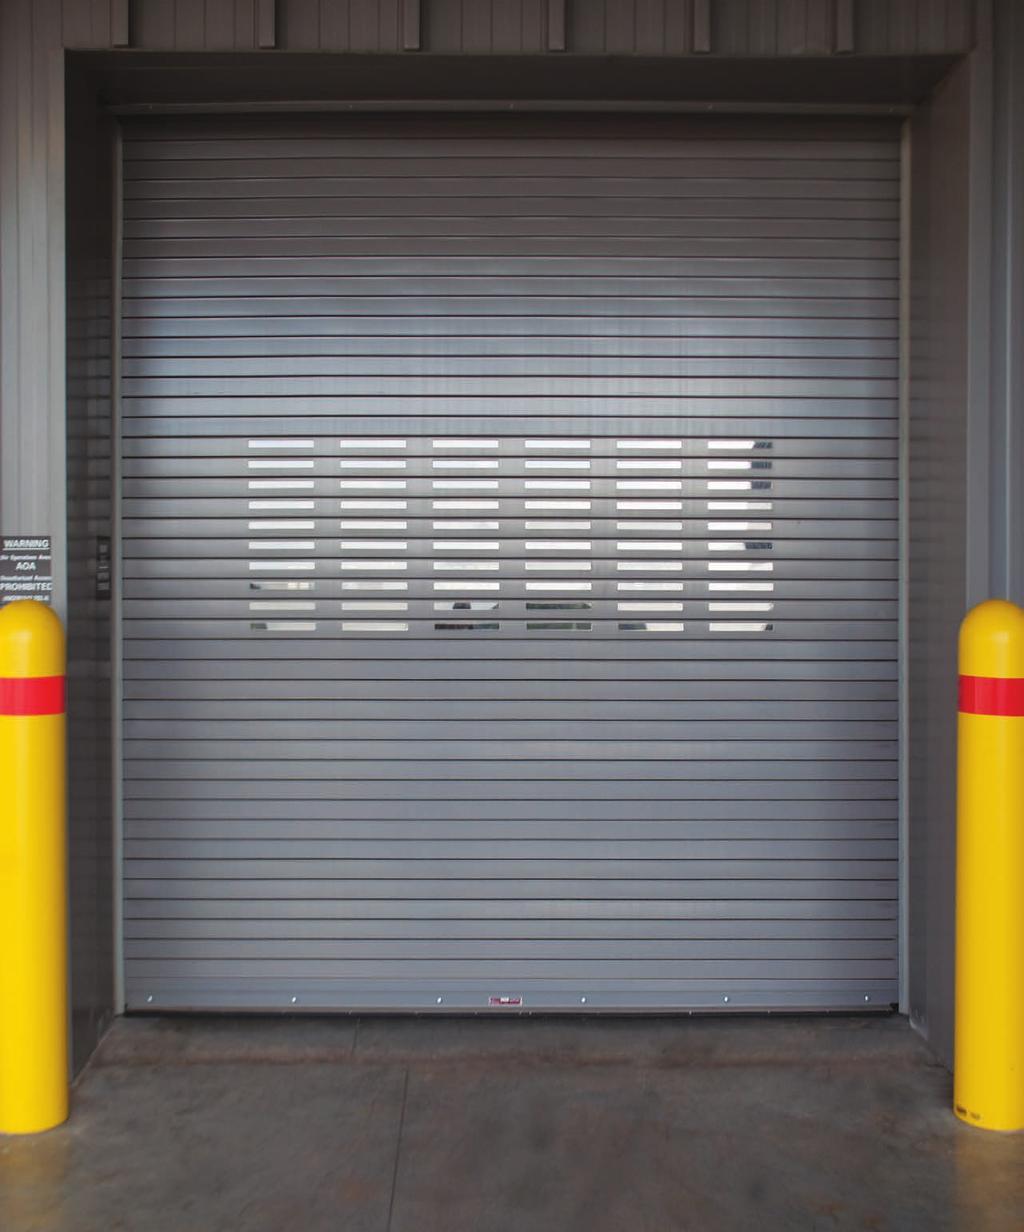 EVERSERVE MODEL 625S SPRINGLESS SERVICE DOORS EVERSERVE MODEL 625S delivers security, reliability and ease of serviceability and is best suited for applications that require protection against